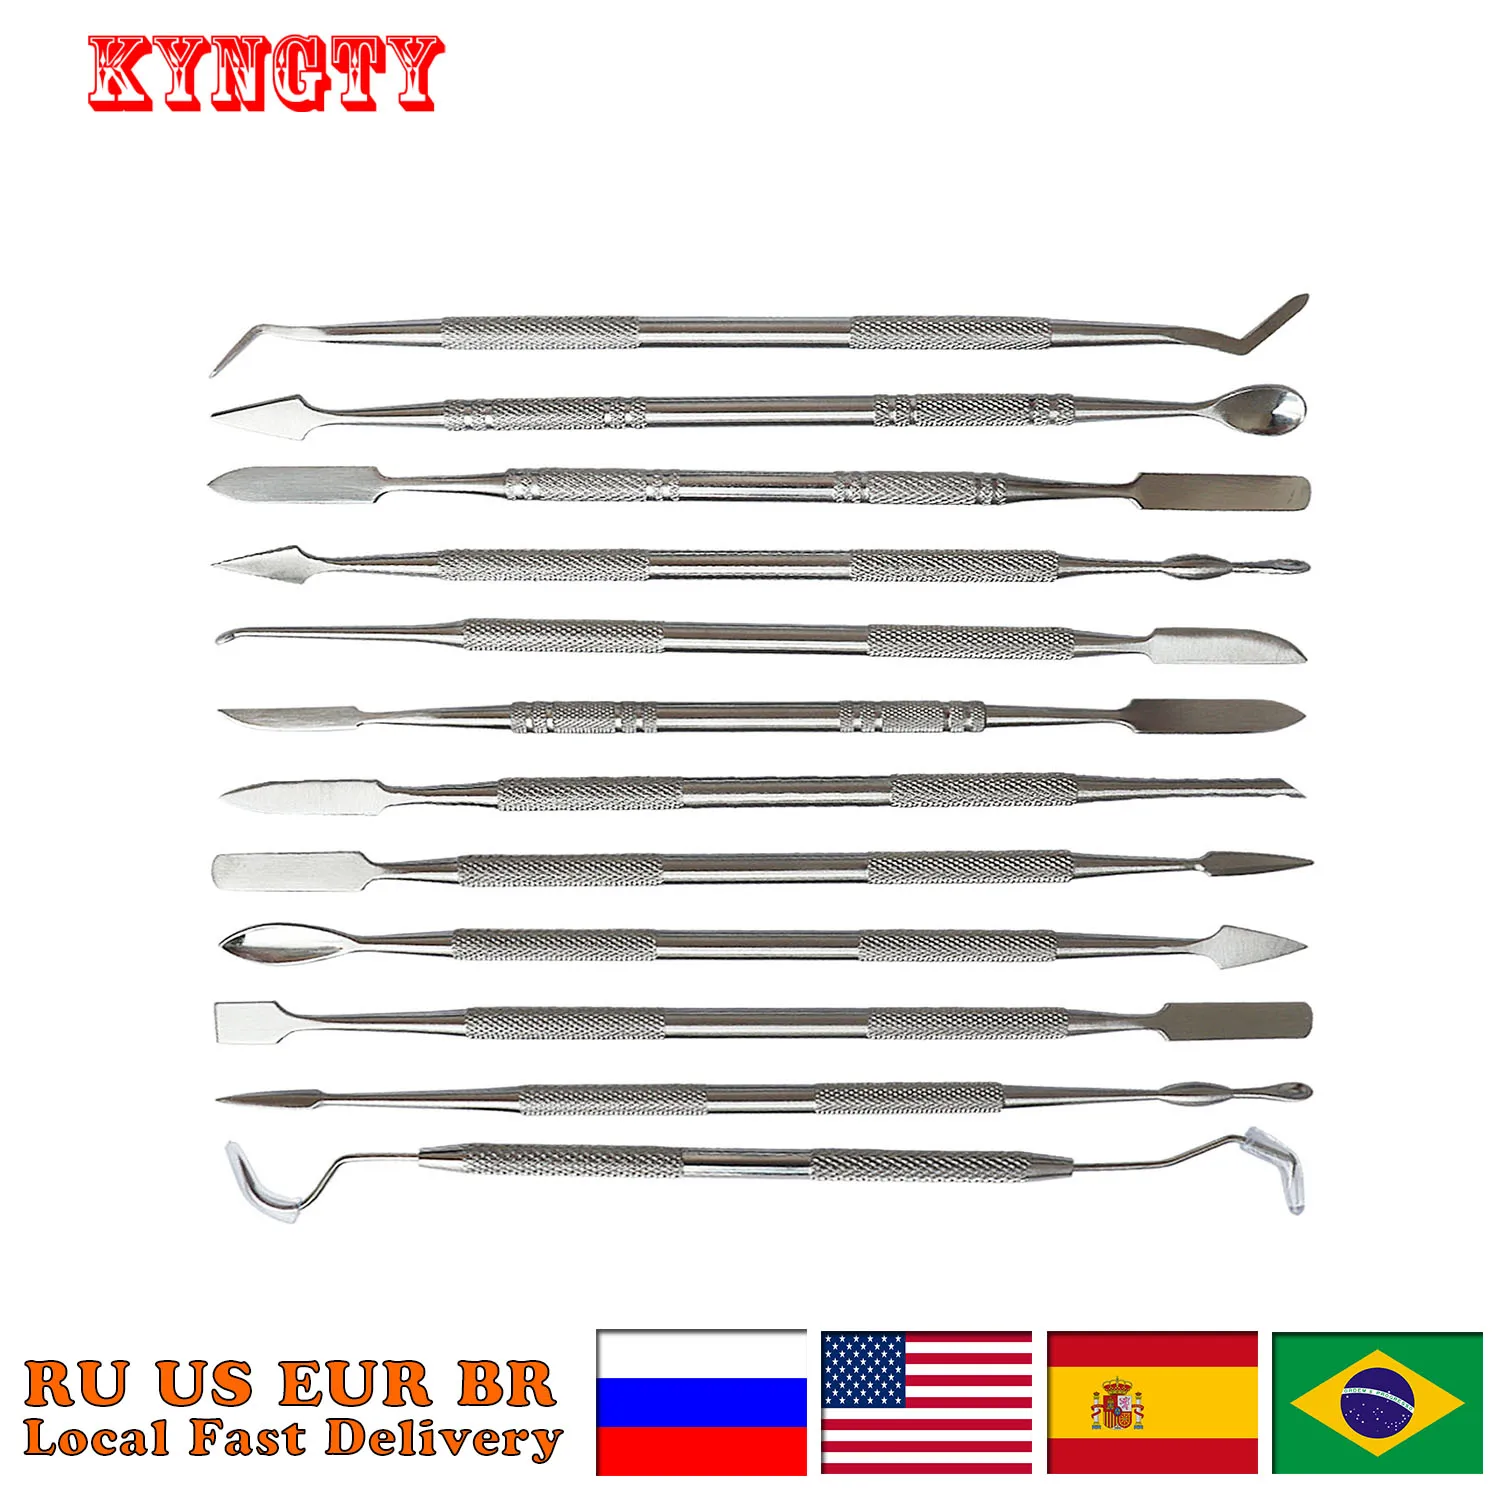 Stainless Steel Metal Spatula for Wax Knife Kit Sculpture Tools Blade Dental Knife Carve Pottery Clay Carving Modeling Jewelry